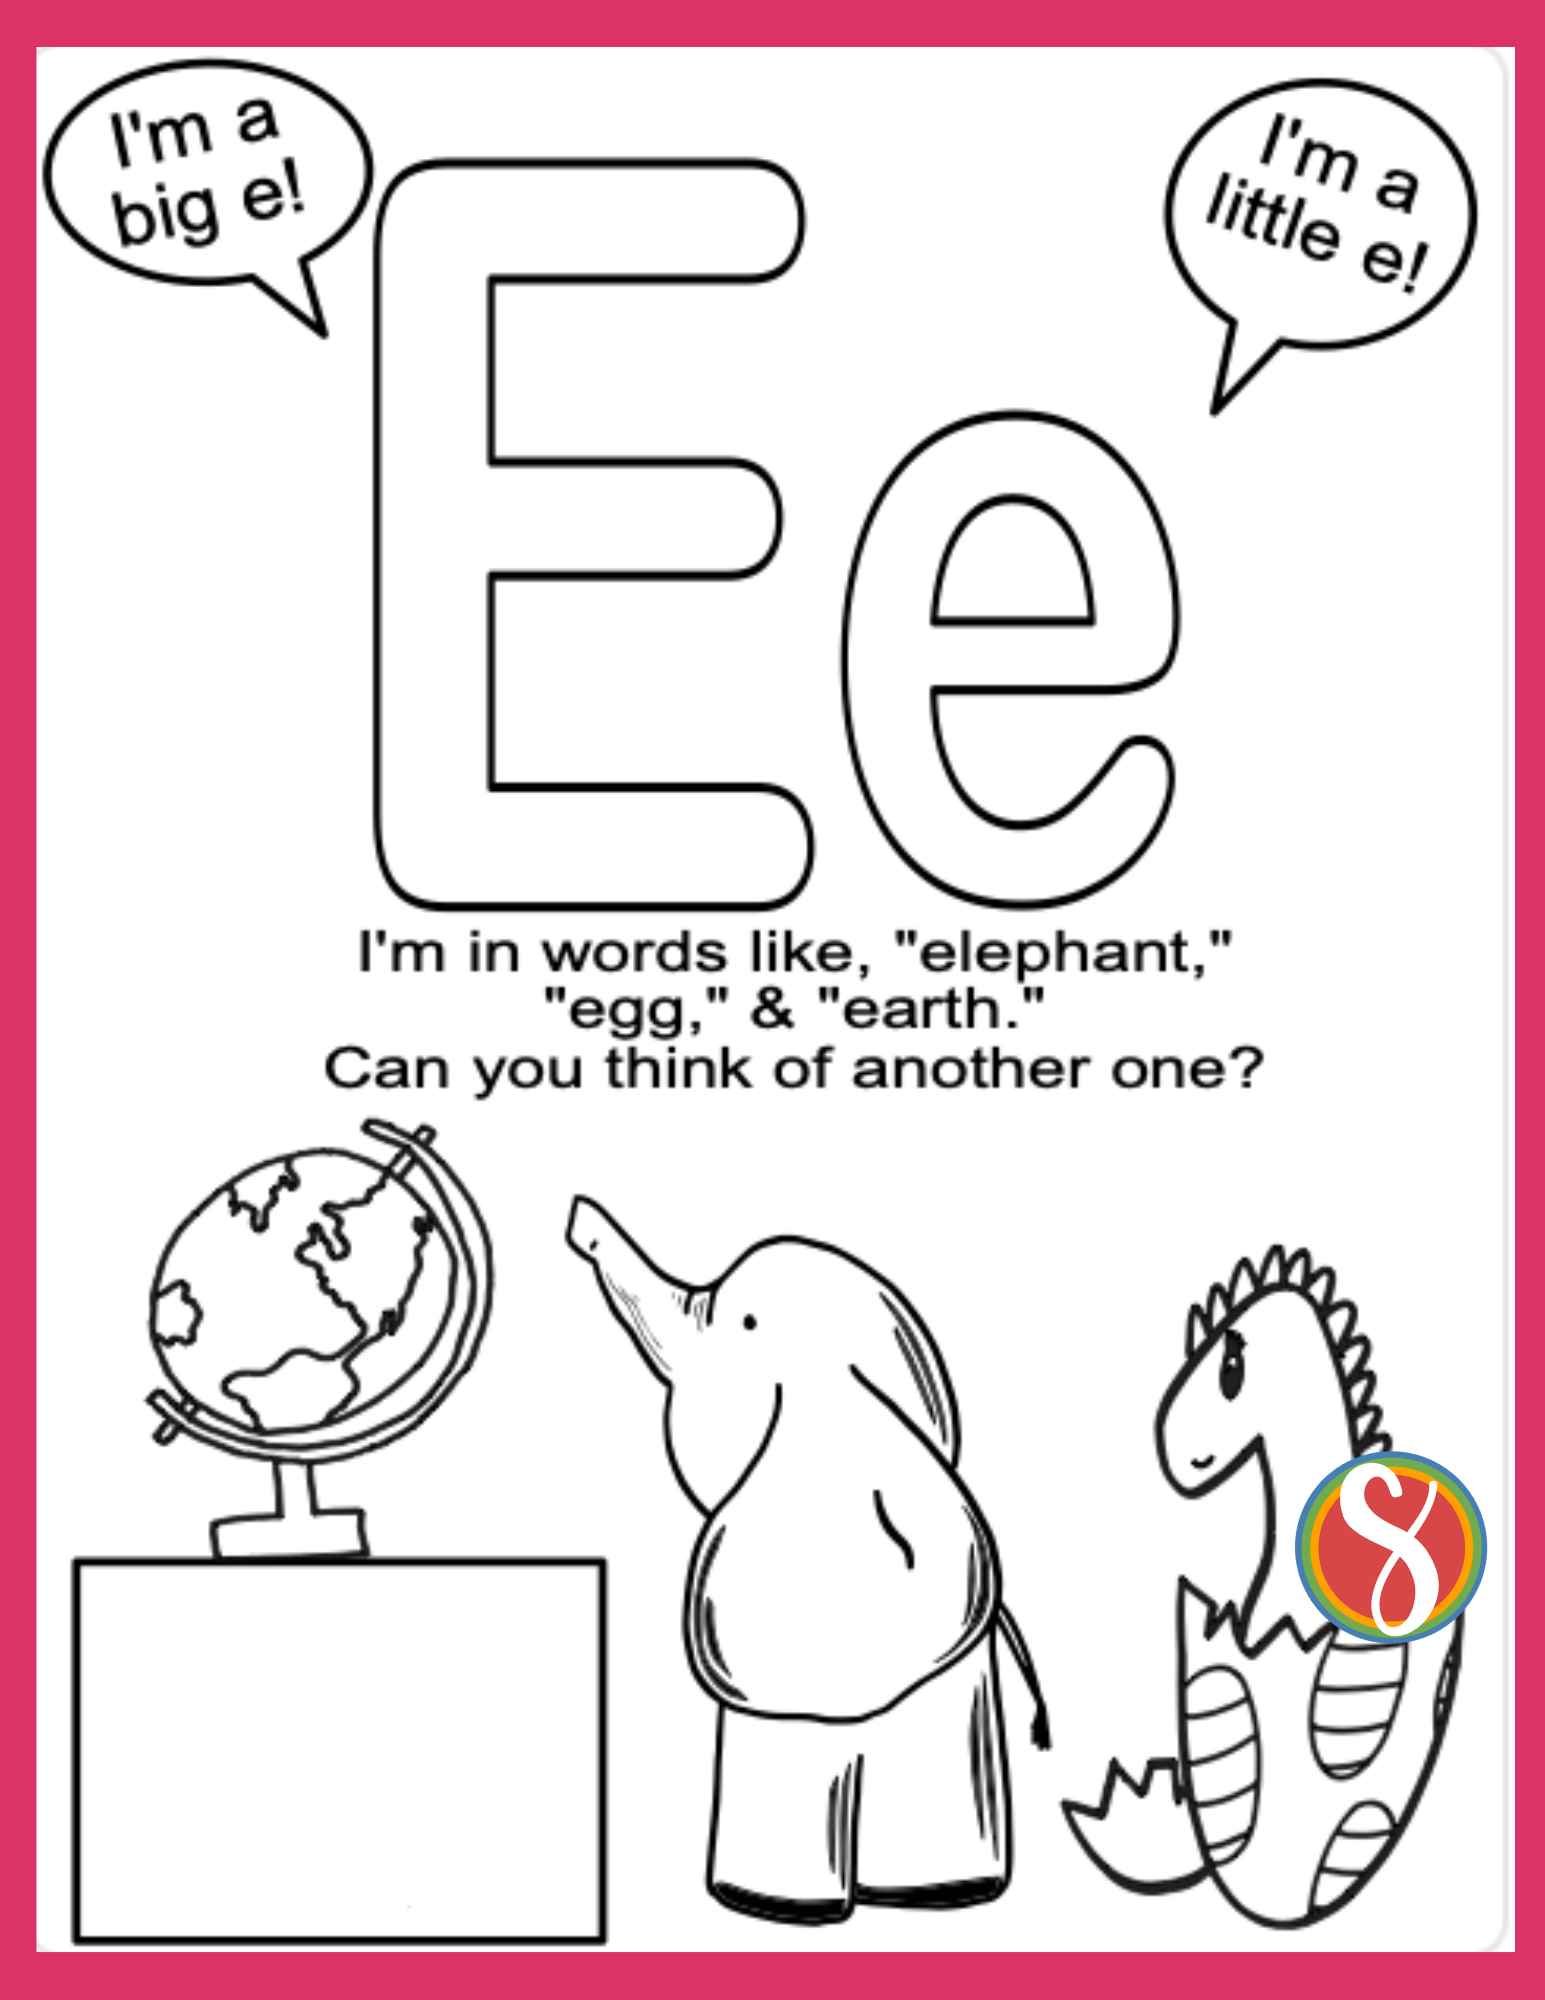 letter e coloring page, elephant drawing, dinosaur egg drawing, earth drawing